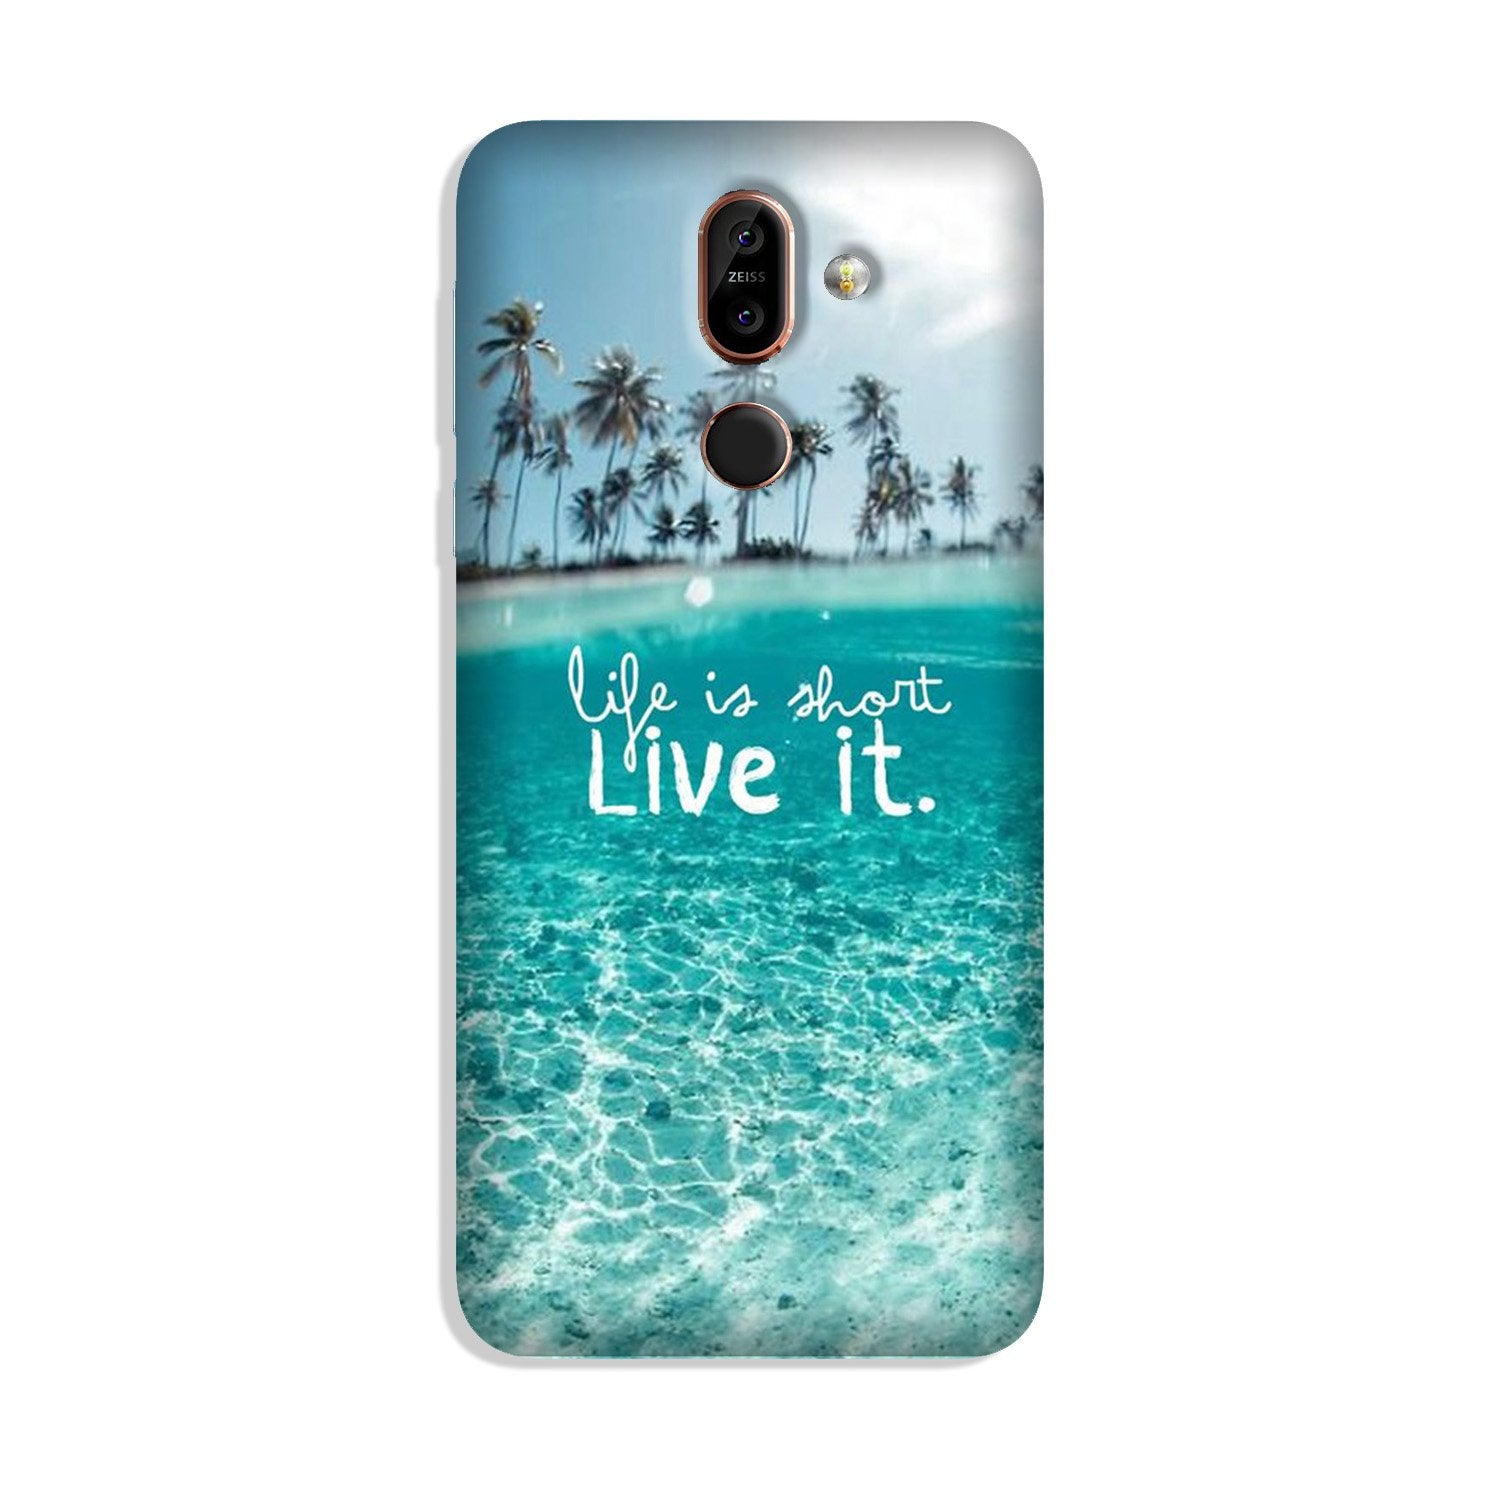 Life is short live it Case for Nokia 8.1